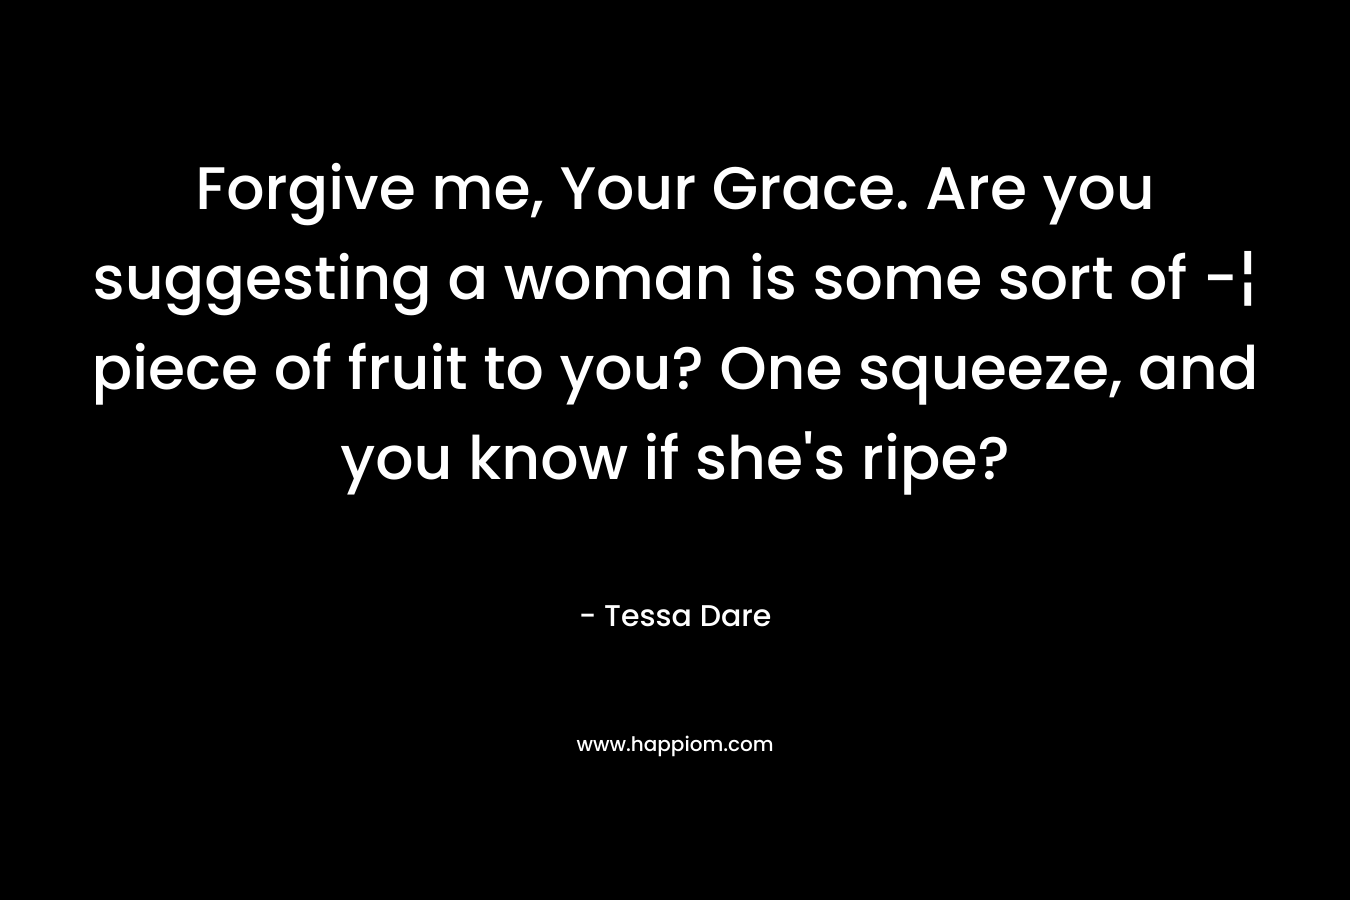 Forgive me, Your Grace. Are you suggesting a woman is some sort of -¦ piece of fruit to you? One squeeze, and you know if she’s ripe? – Tessa Dare